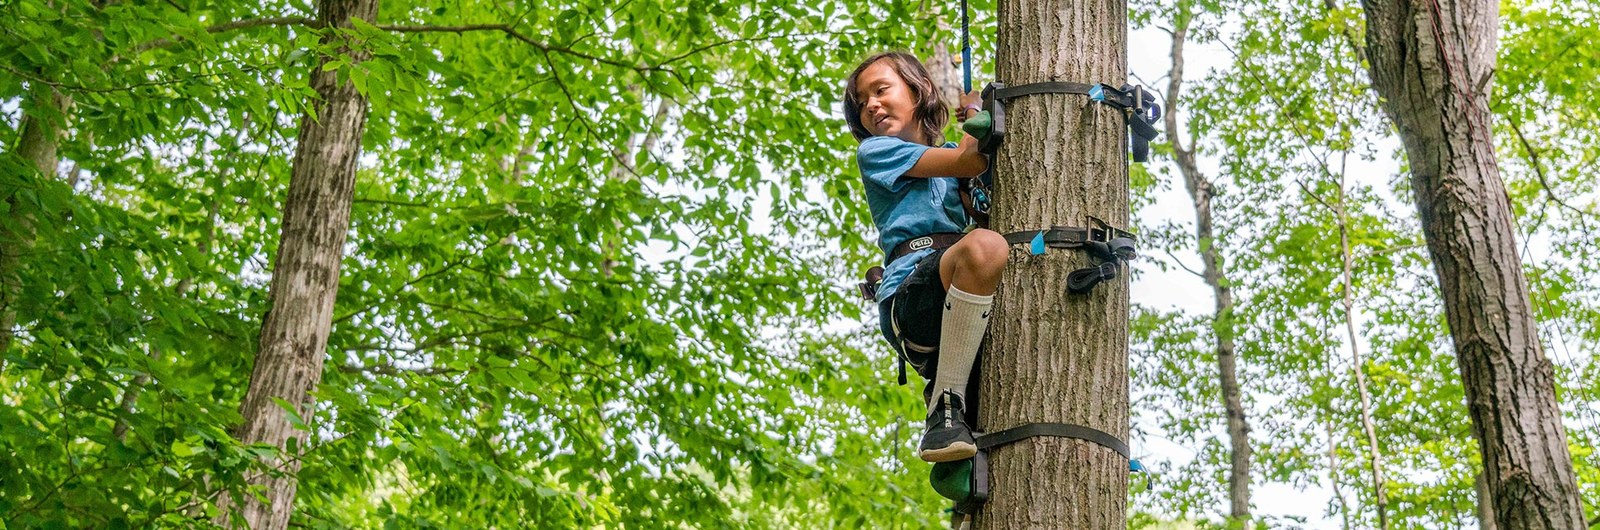 A young boy climbs a tree in the Climbing Forest